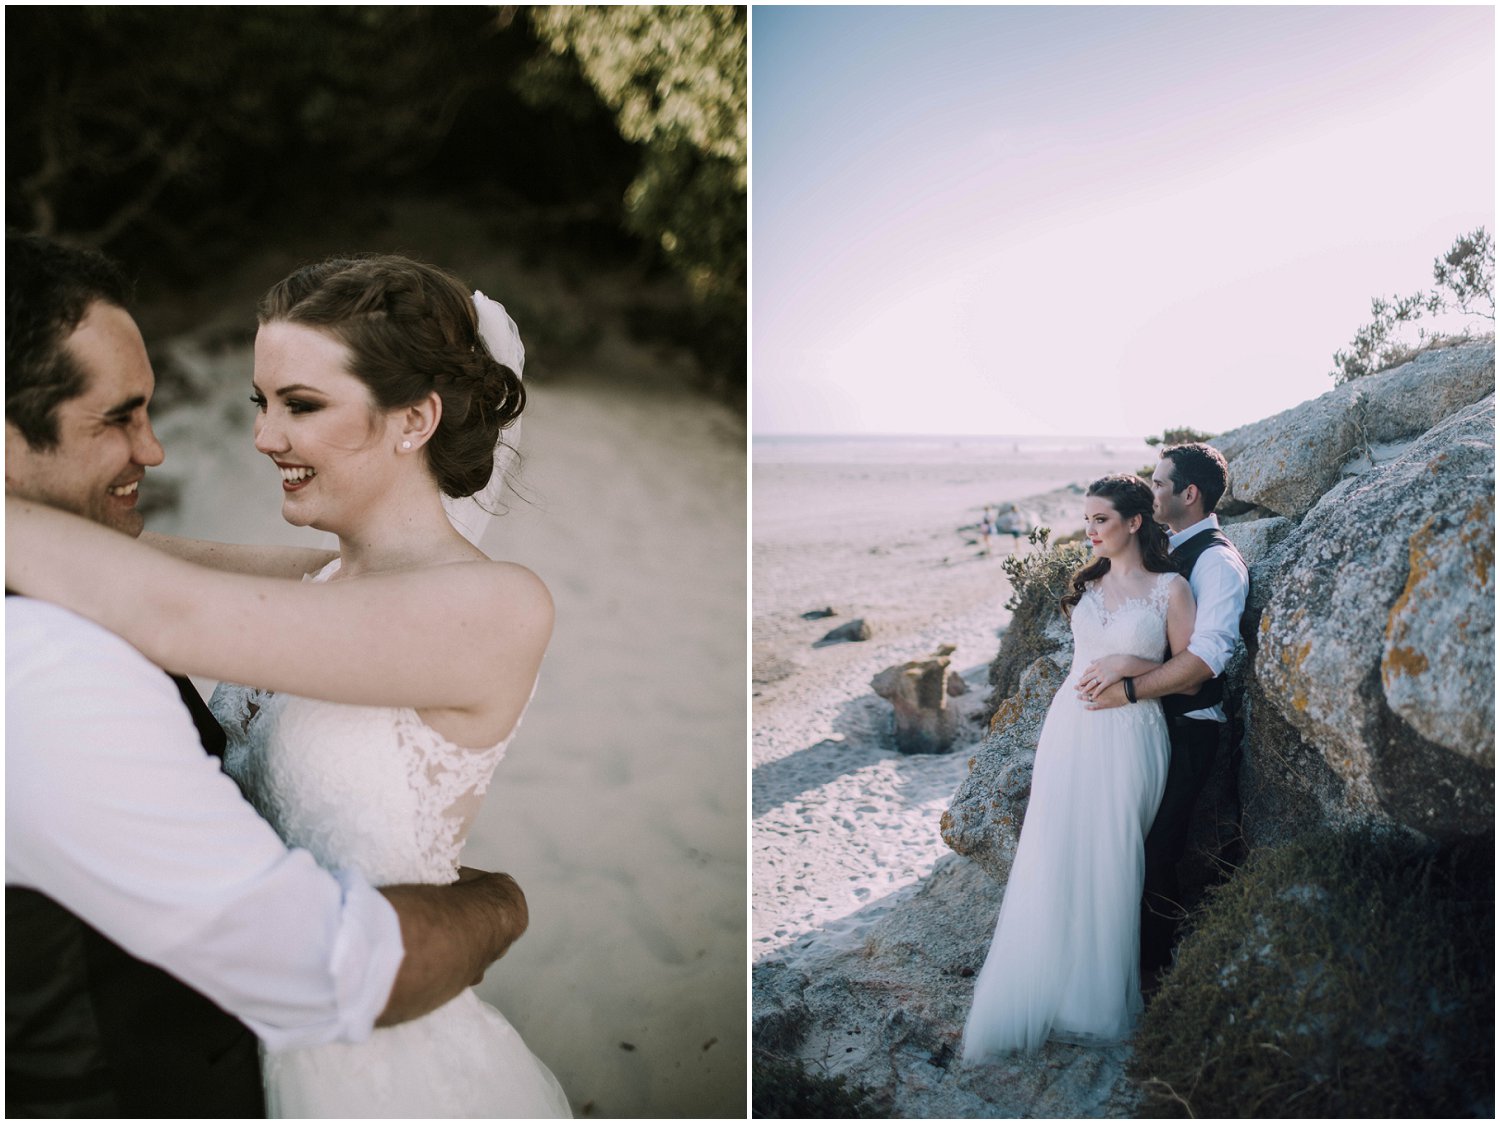 Top Wedding Photographer Cape Town South Africa Artistic Creative Documentary Wedding Photography Rue Kruger_0518.jpg